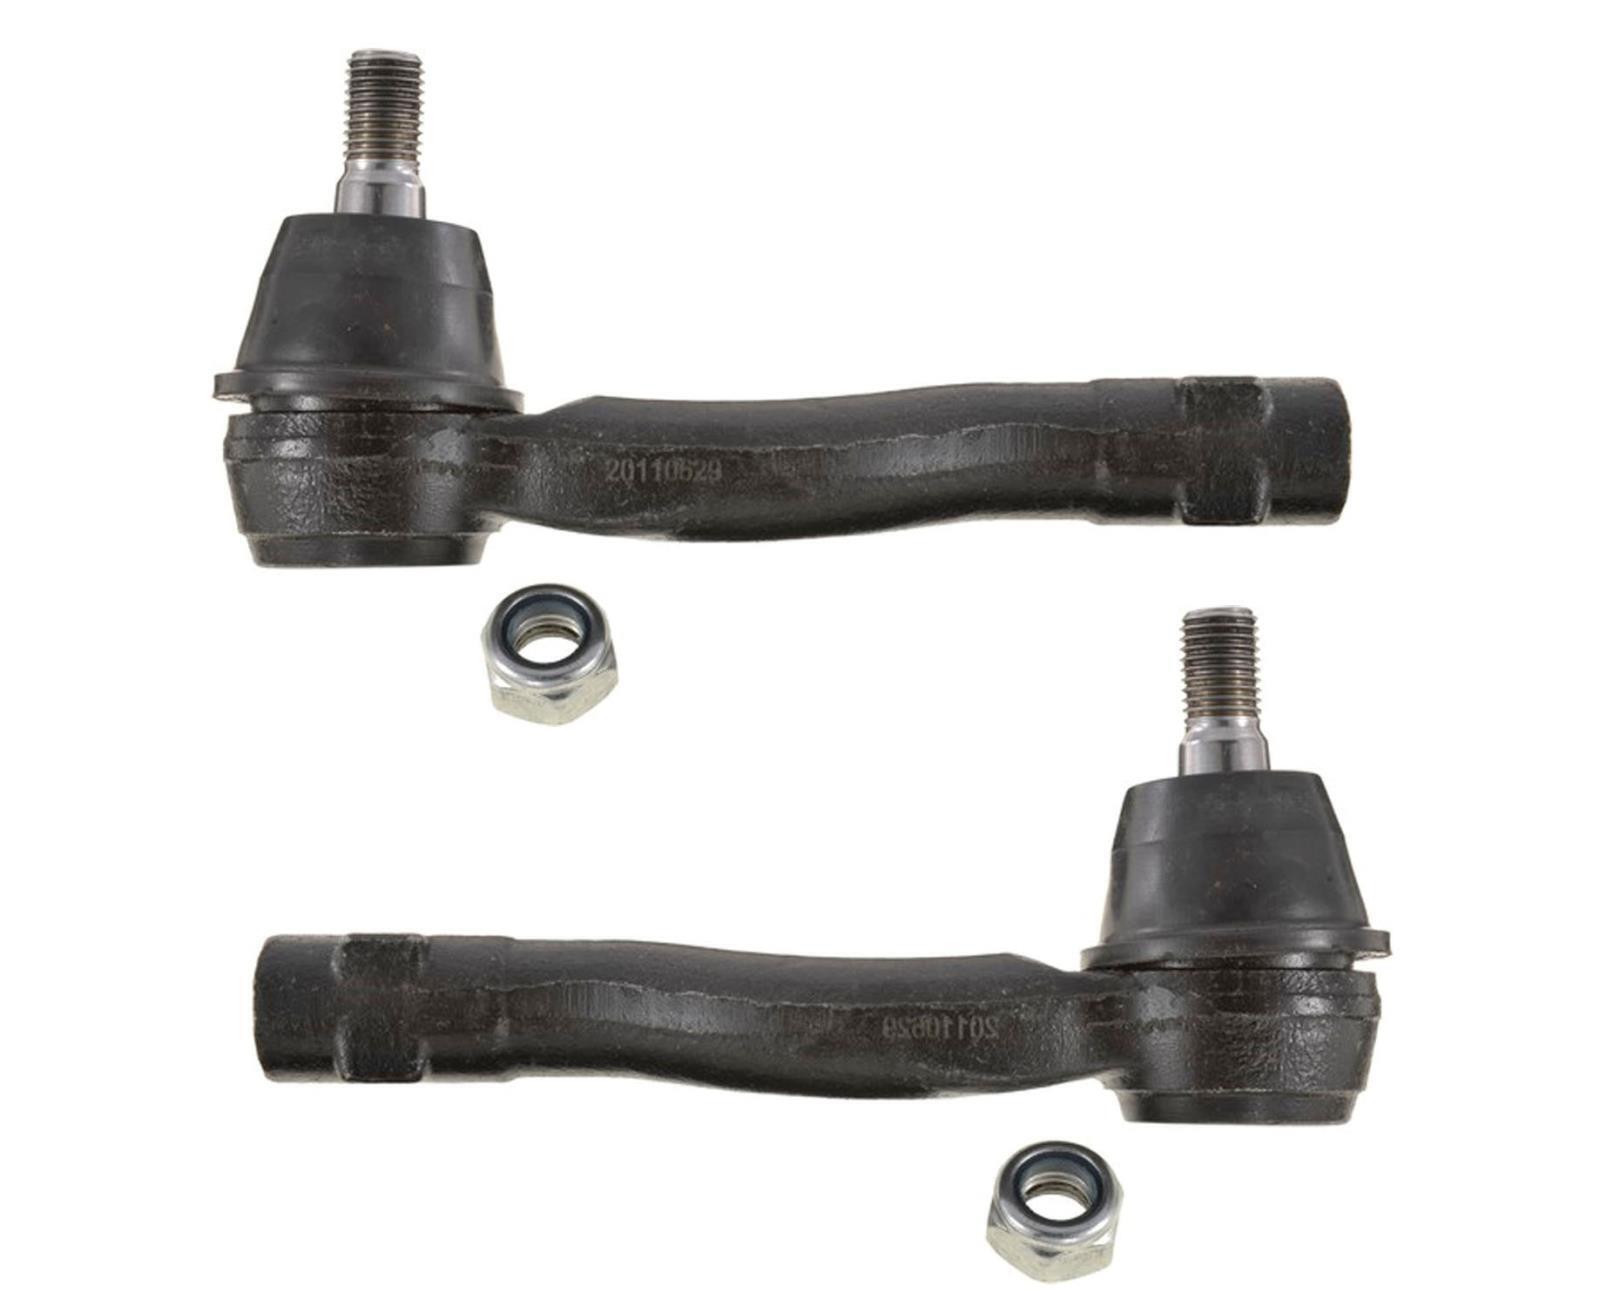 Fits 2004 to 08 Suzuki Forenza 05-08 Reno (2) L & R Steering Outer Tie Rod Ends